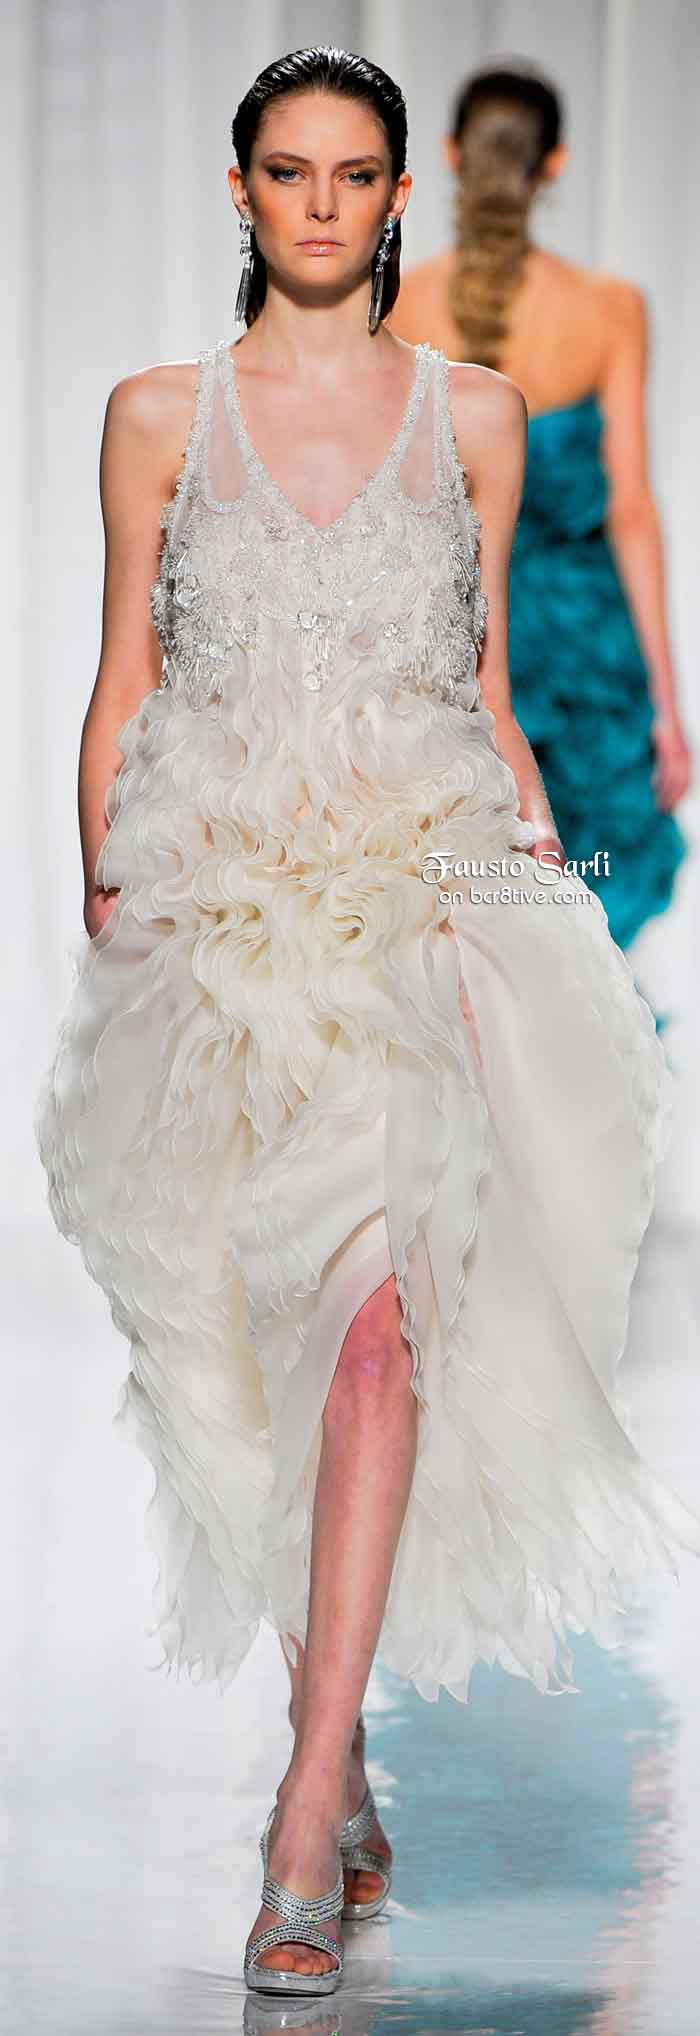 Fausto Sarli Spring Summer 2011 Haute Couture – Page 2 – Be Creative